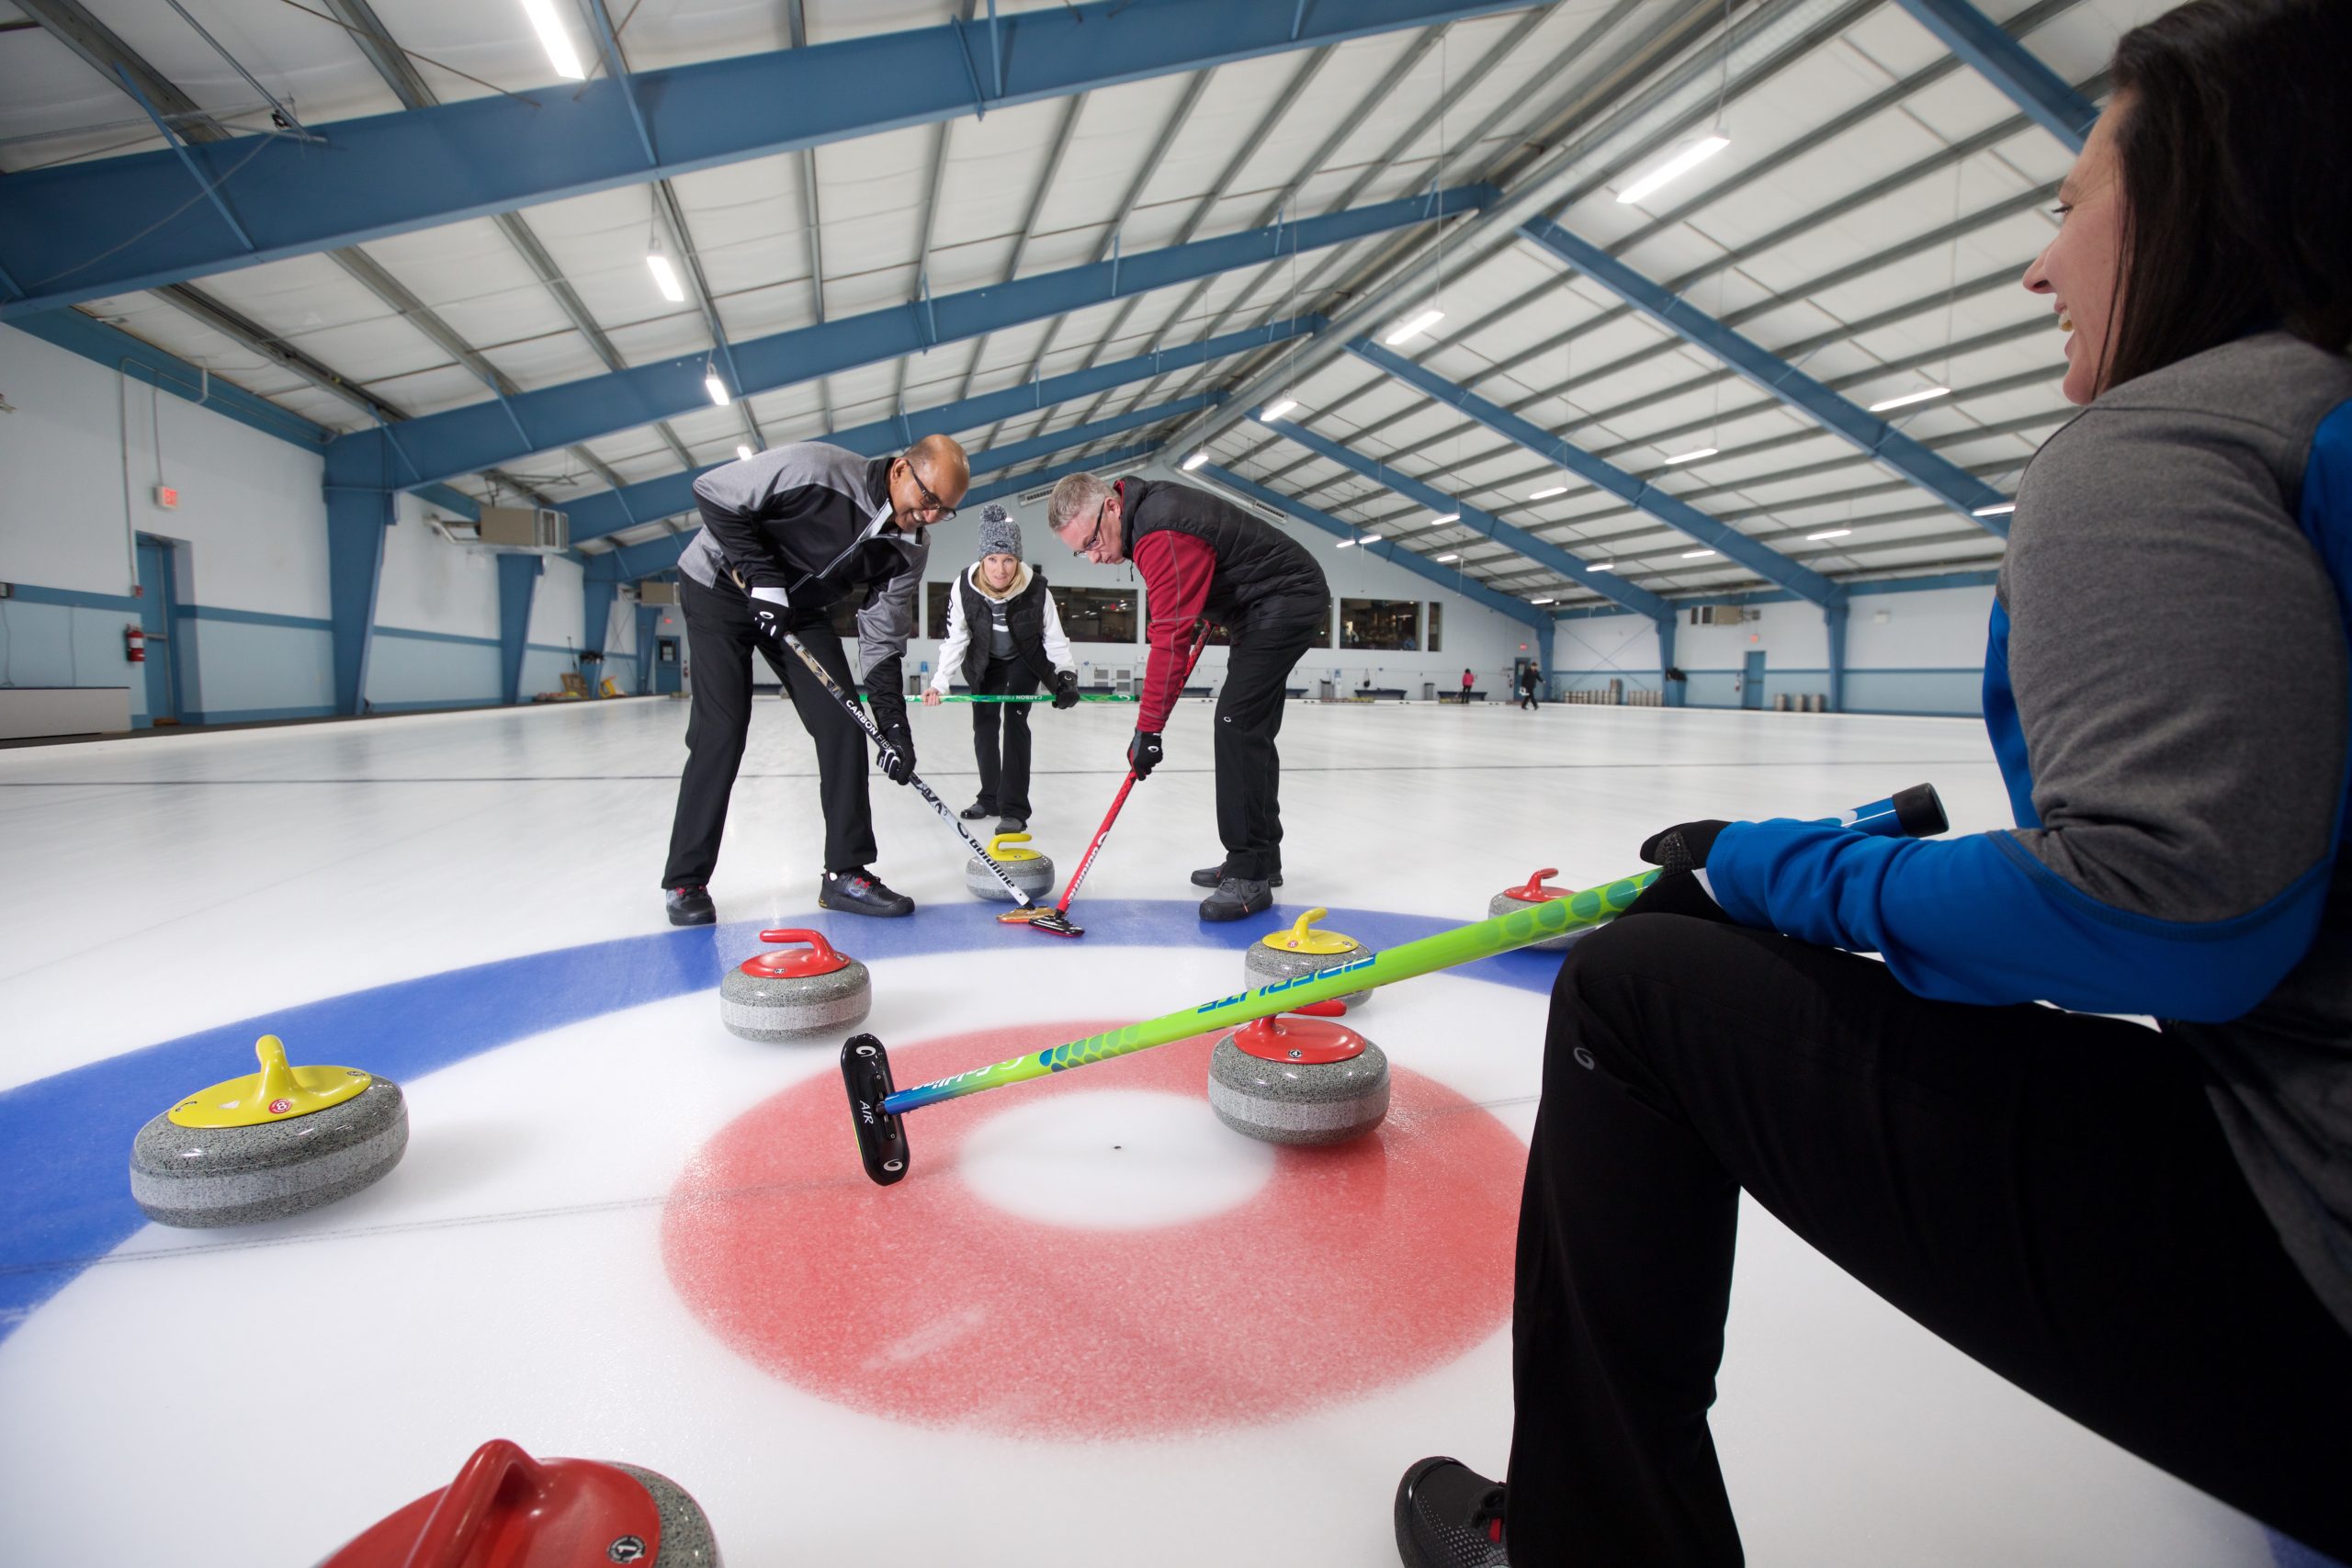 How to get started in curling